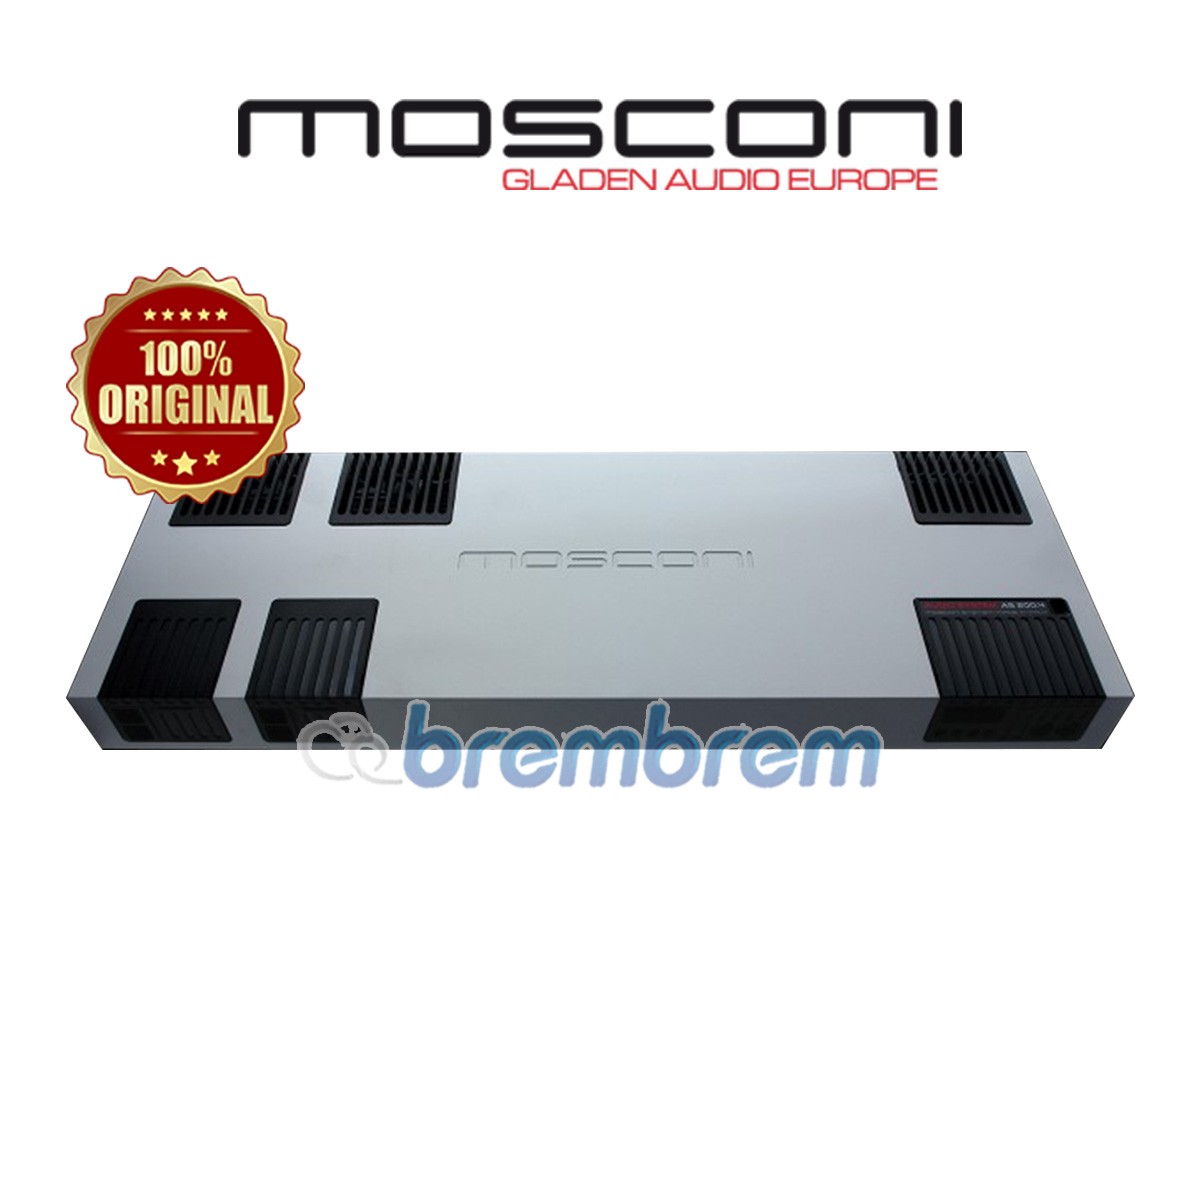 MOSCONI AS 200.4 - POWER 4 CHANNEL